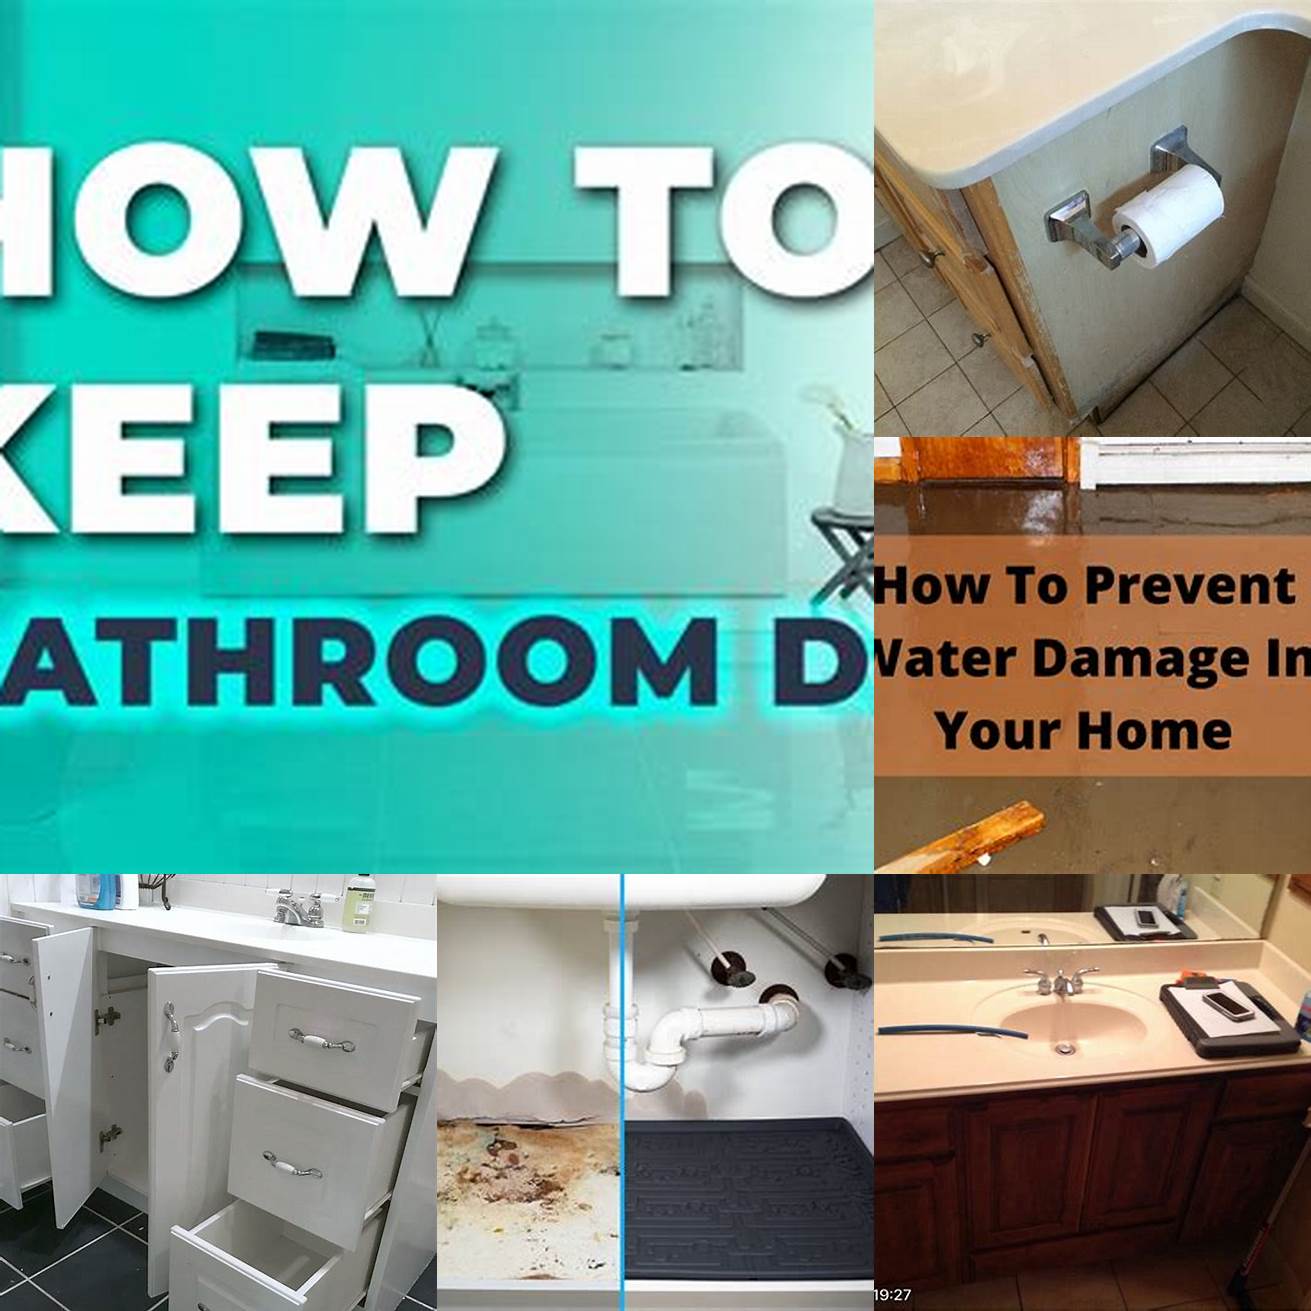 5 Keep It Dry Keep your vanity dry to prevent water damage